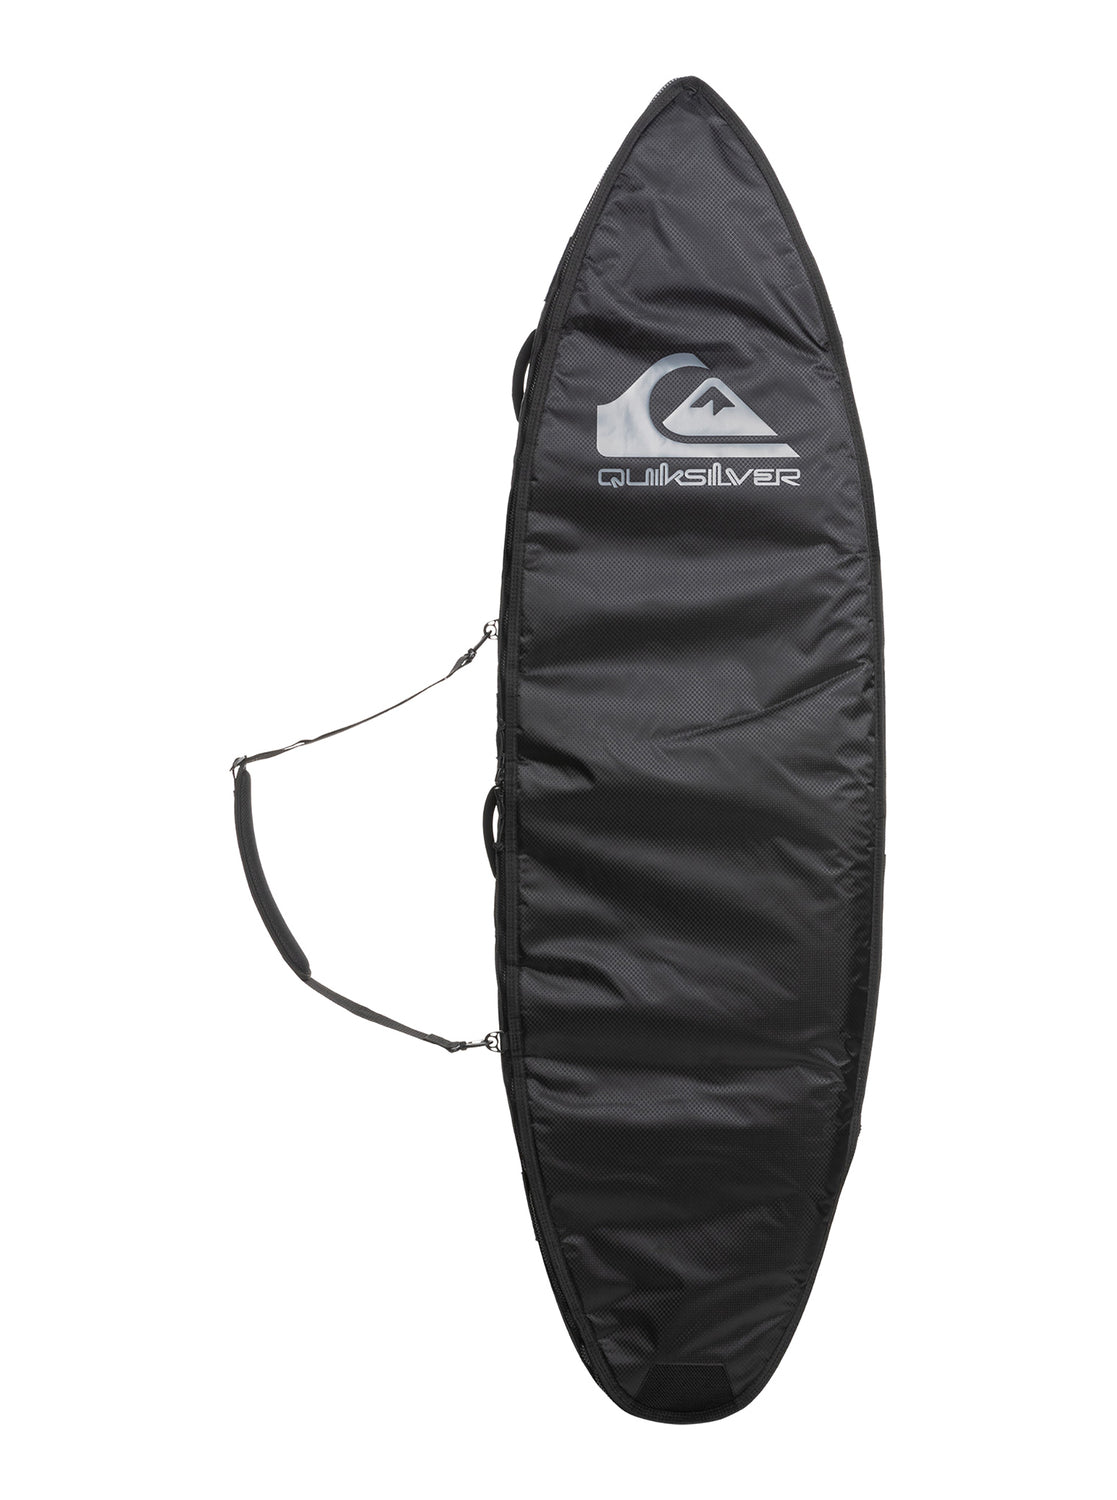 Quiksilver Expedition Double Travel Surfboard Bag